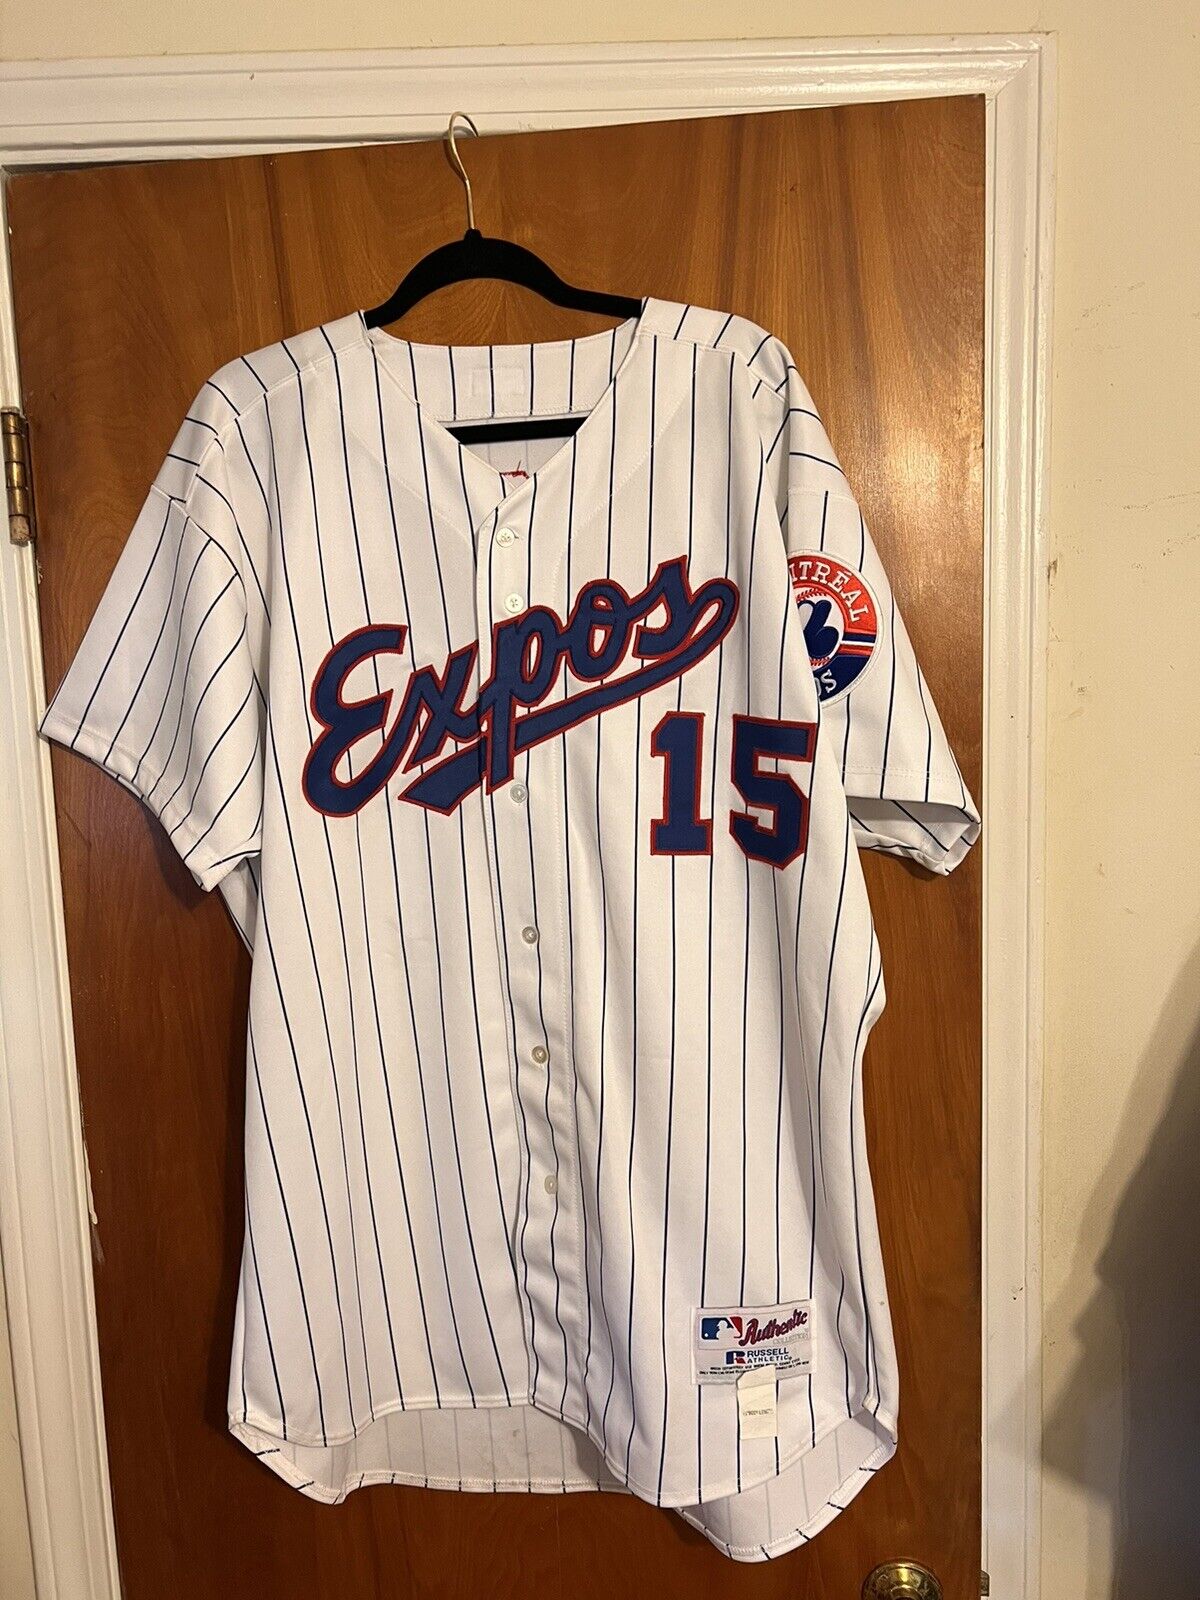 Randy Knorr #15 Montreal Expos jersey